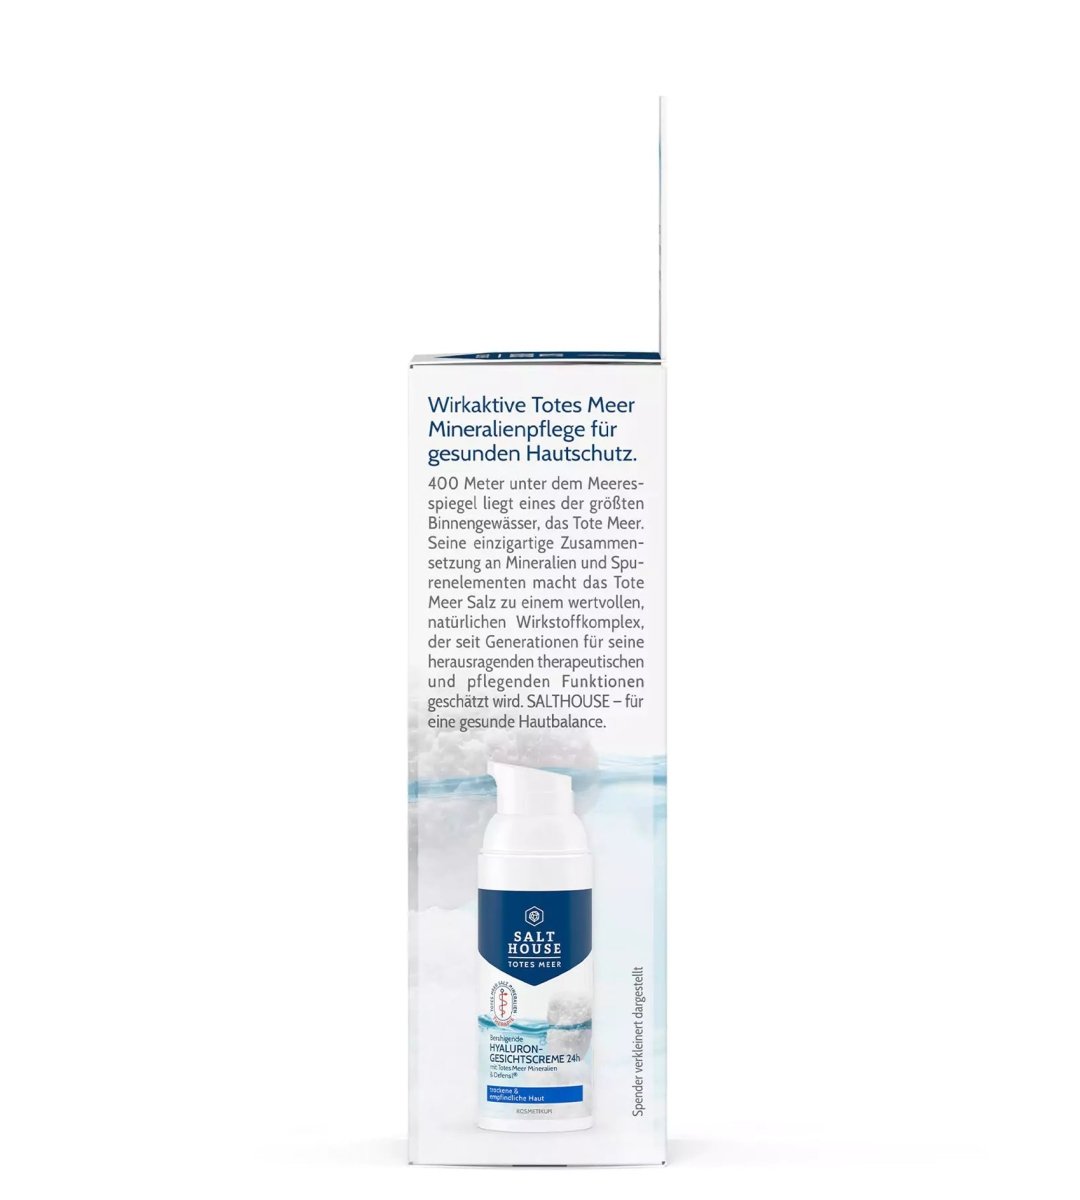 SALTHOUSE® Original Totes Meer Therapie | Hyaluron Gesichtscreme 24h | 50ml